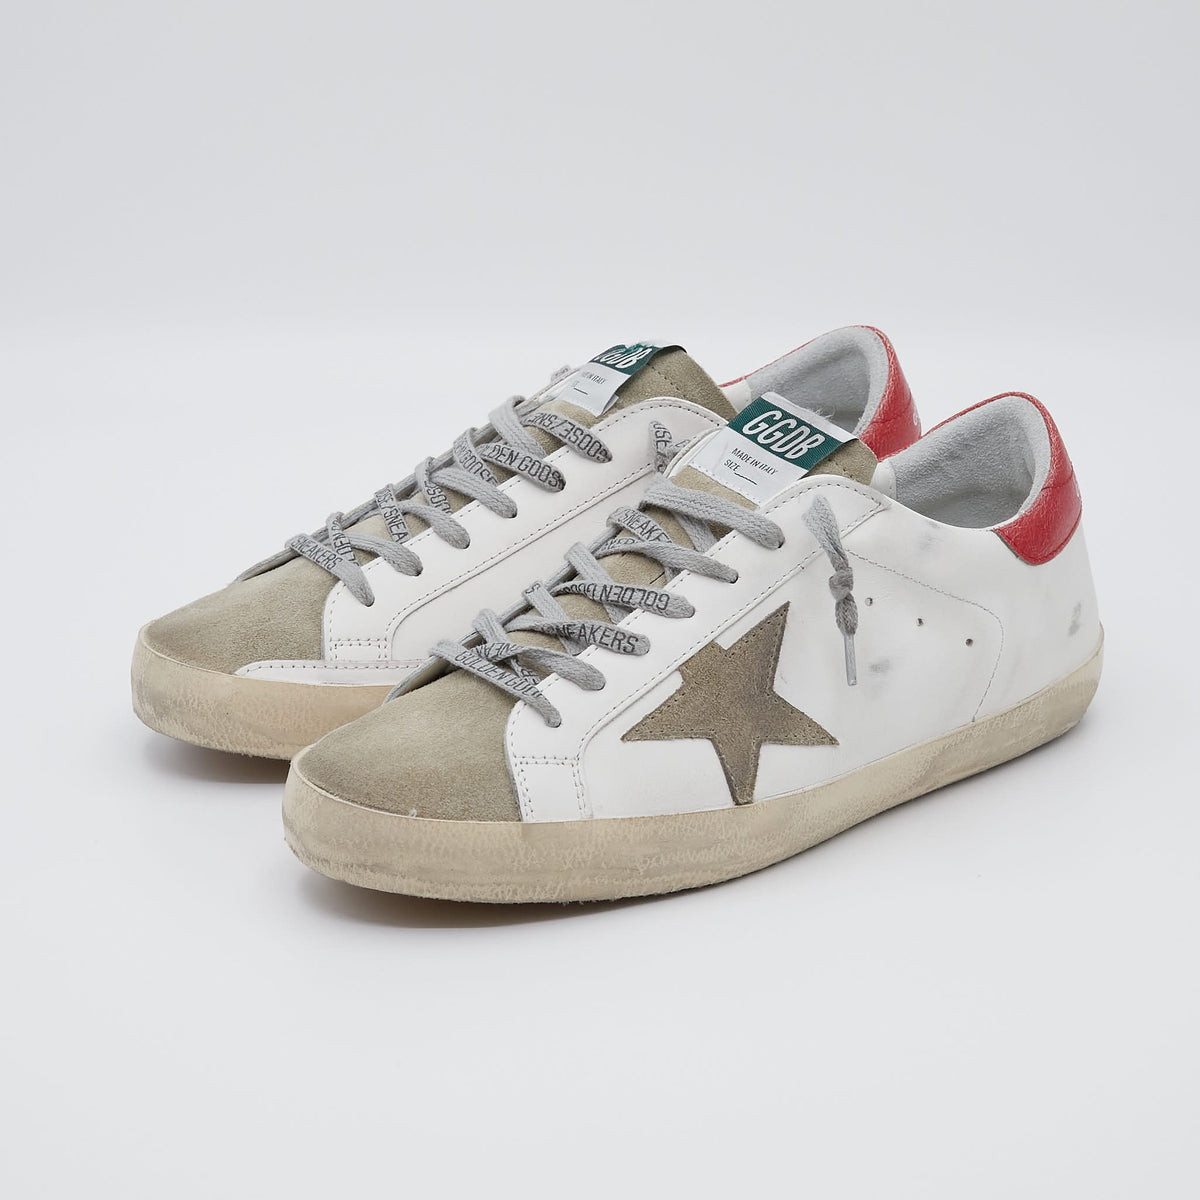 Golden Goose White Taupe Red Sneakers Superstar